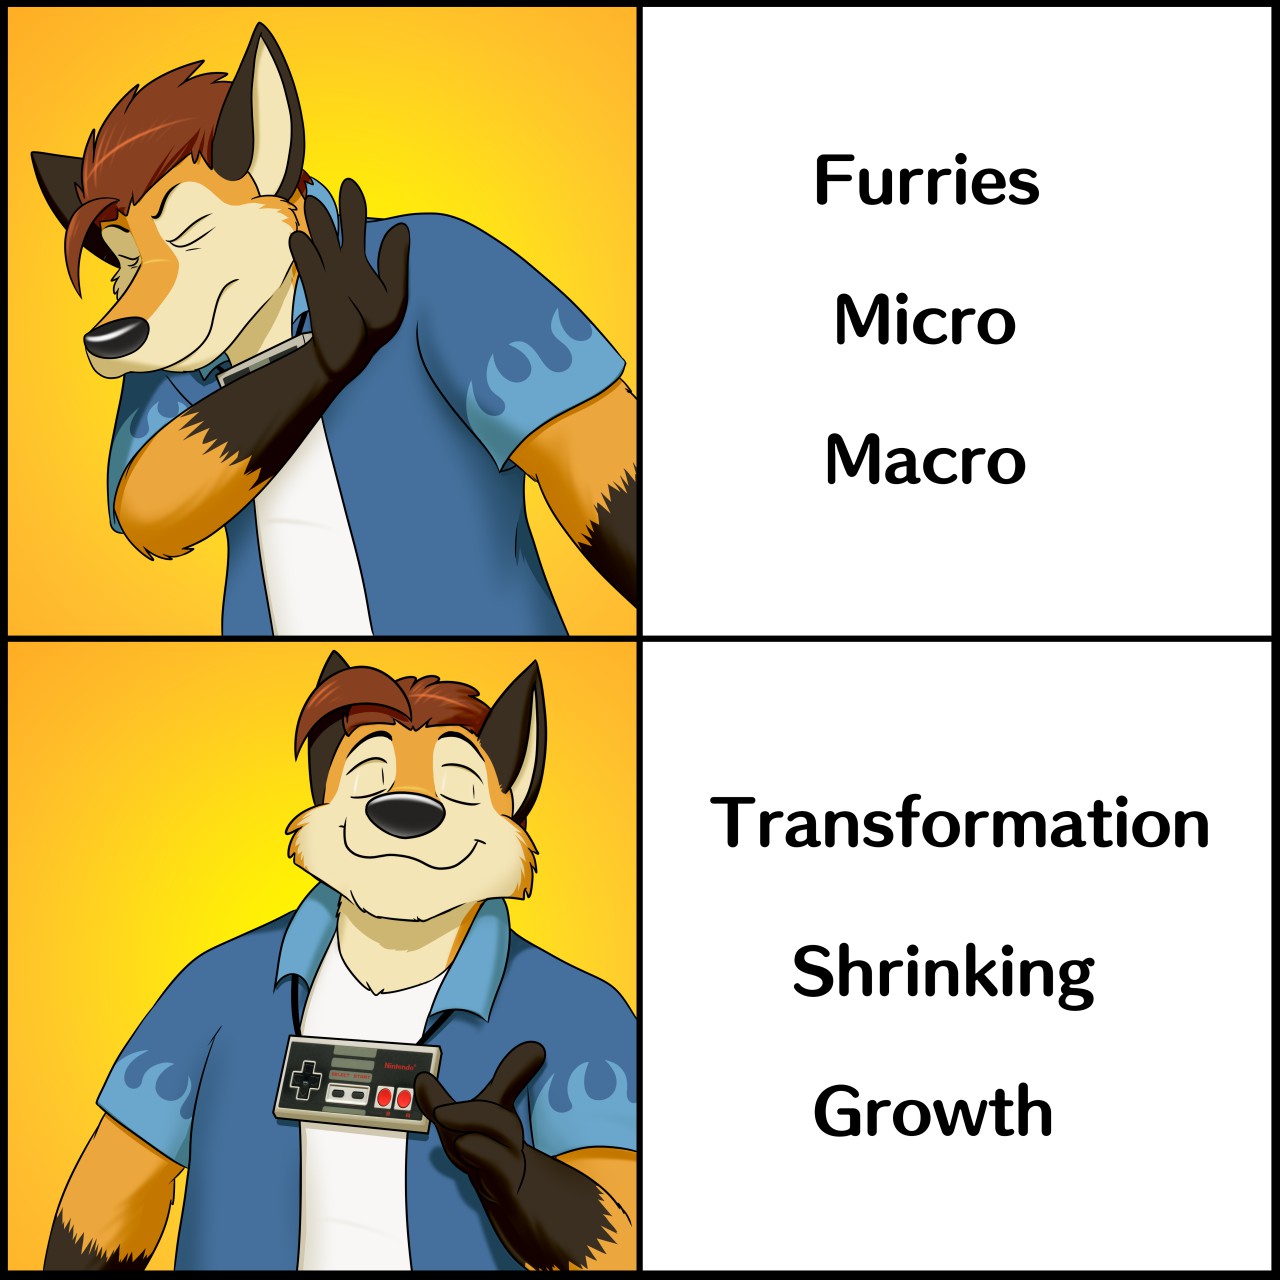 RELATABLE FURRY MEMES from a Furry Discord Server! by